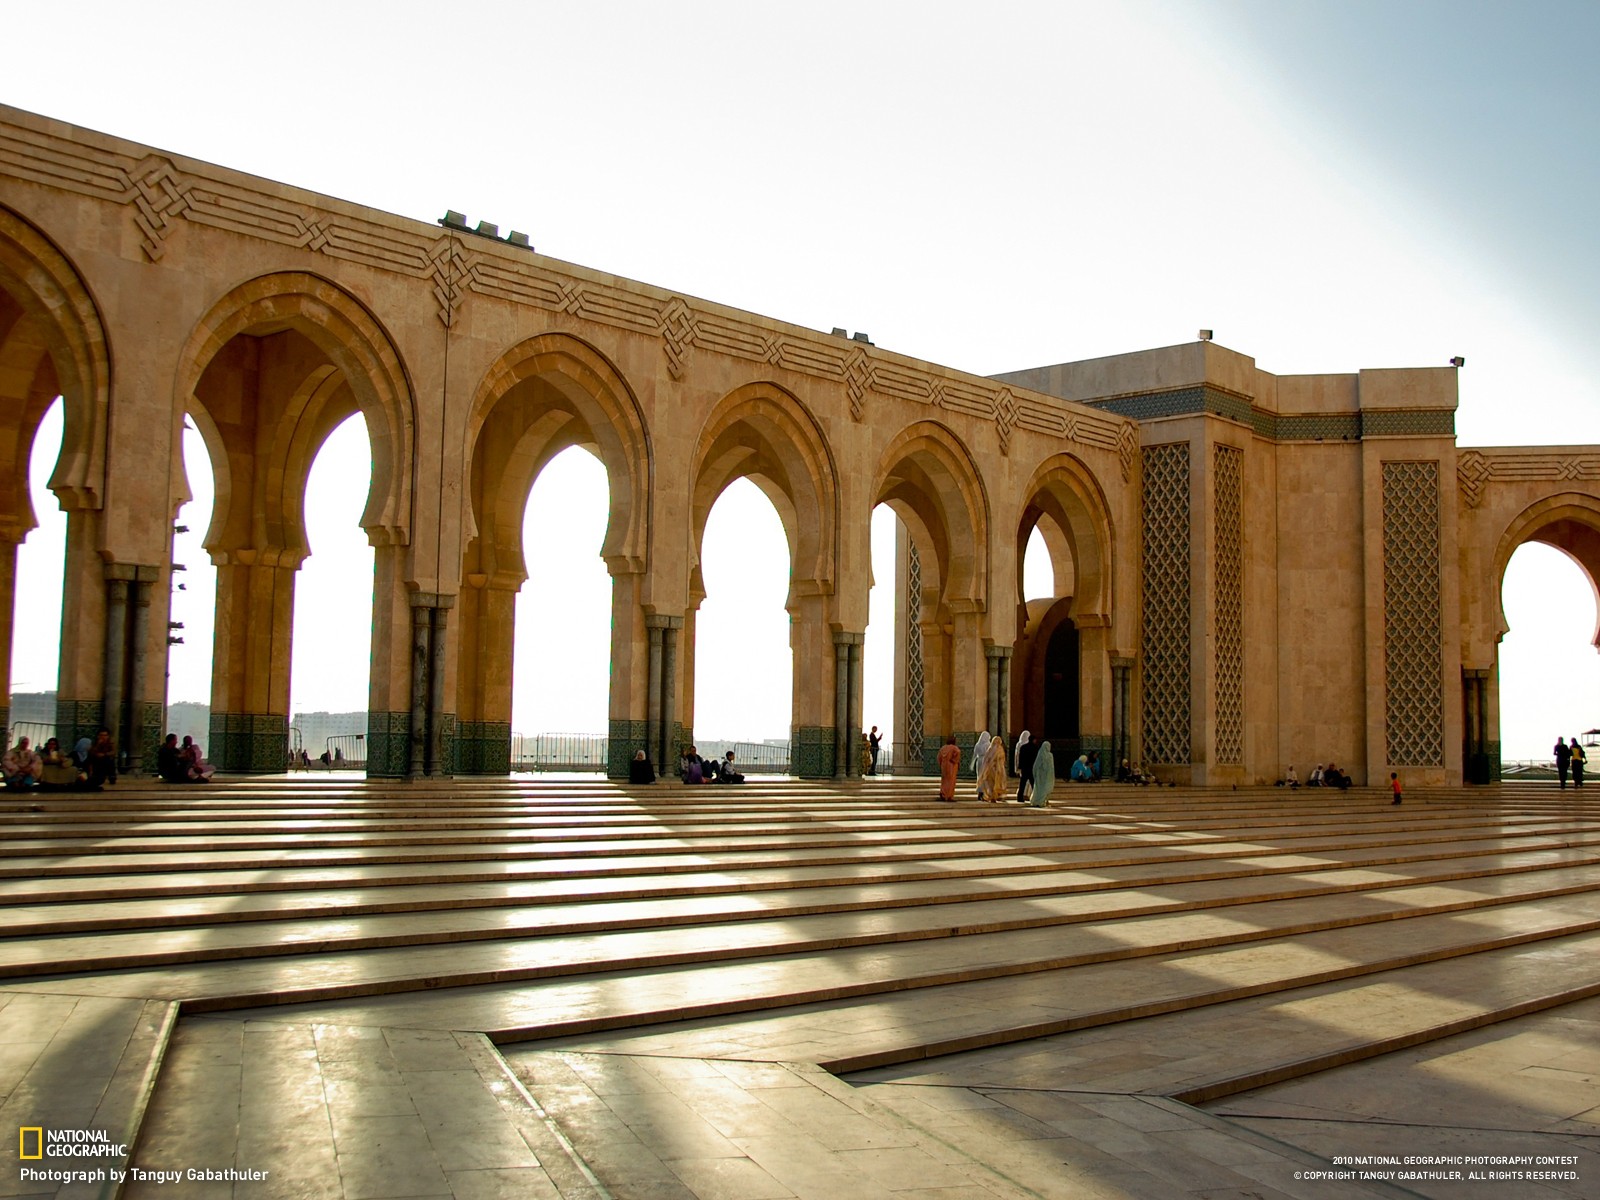 General 1600x1200 National Geographic mosque Morocco people Islamic architecture 2010 (Year)